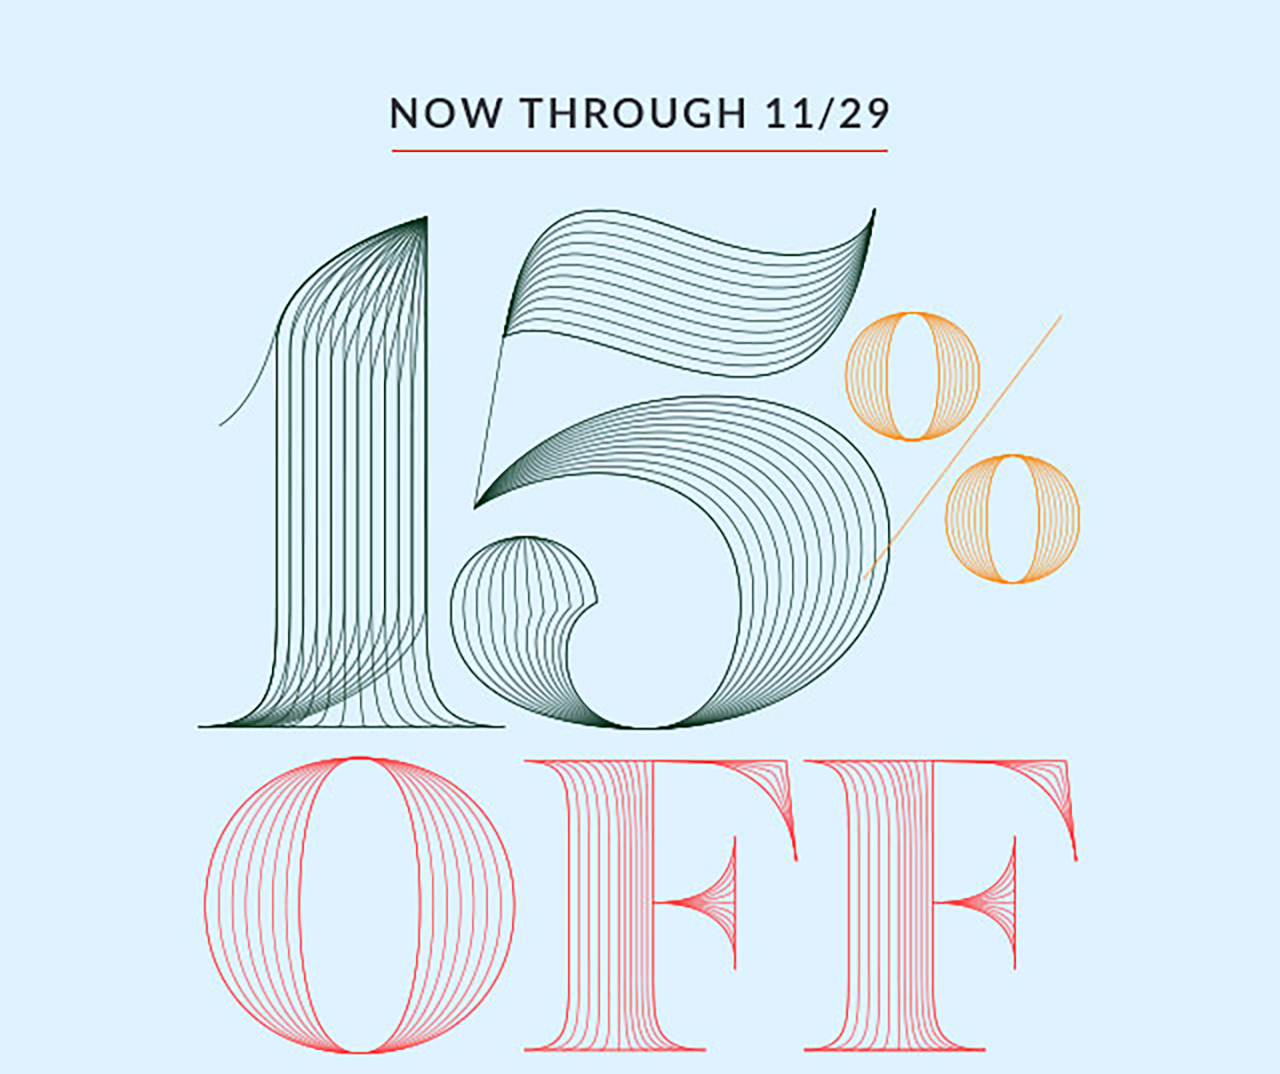 Time to celebrate 15% off